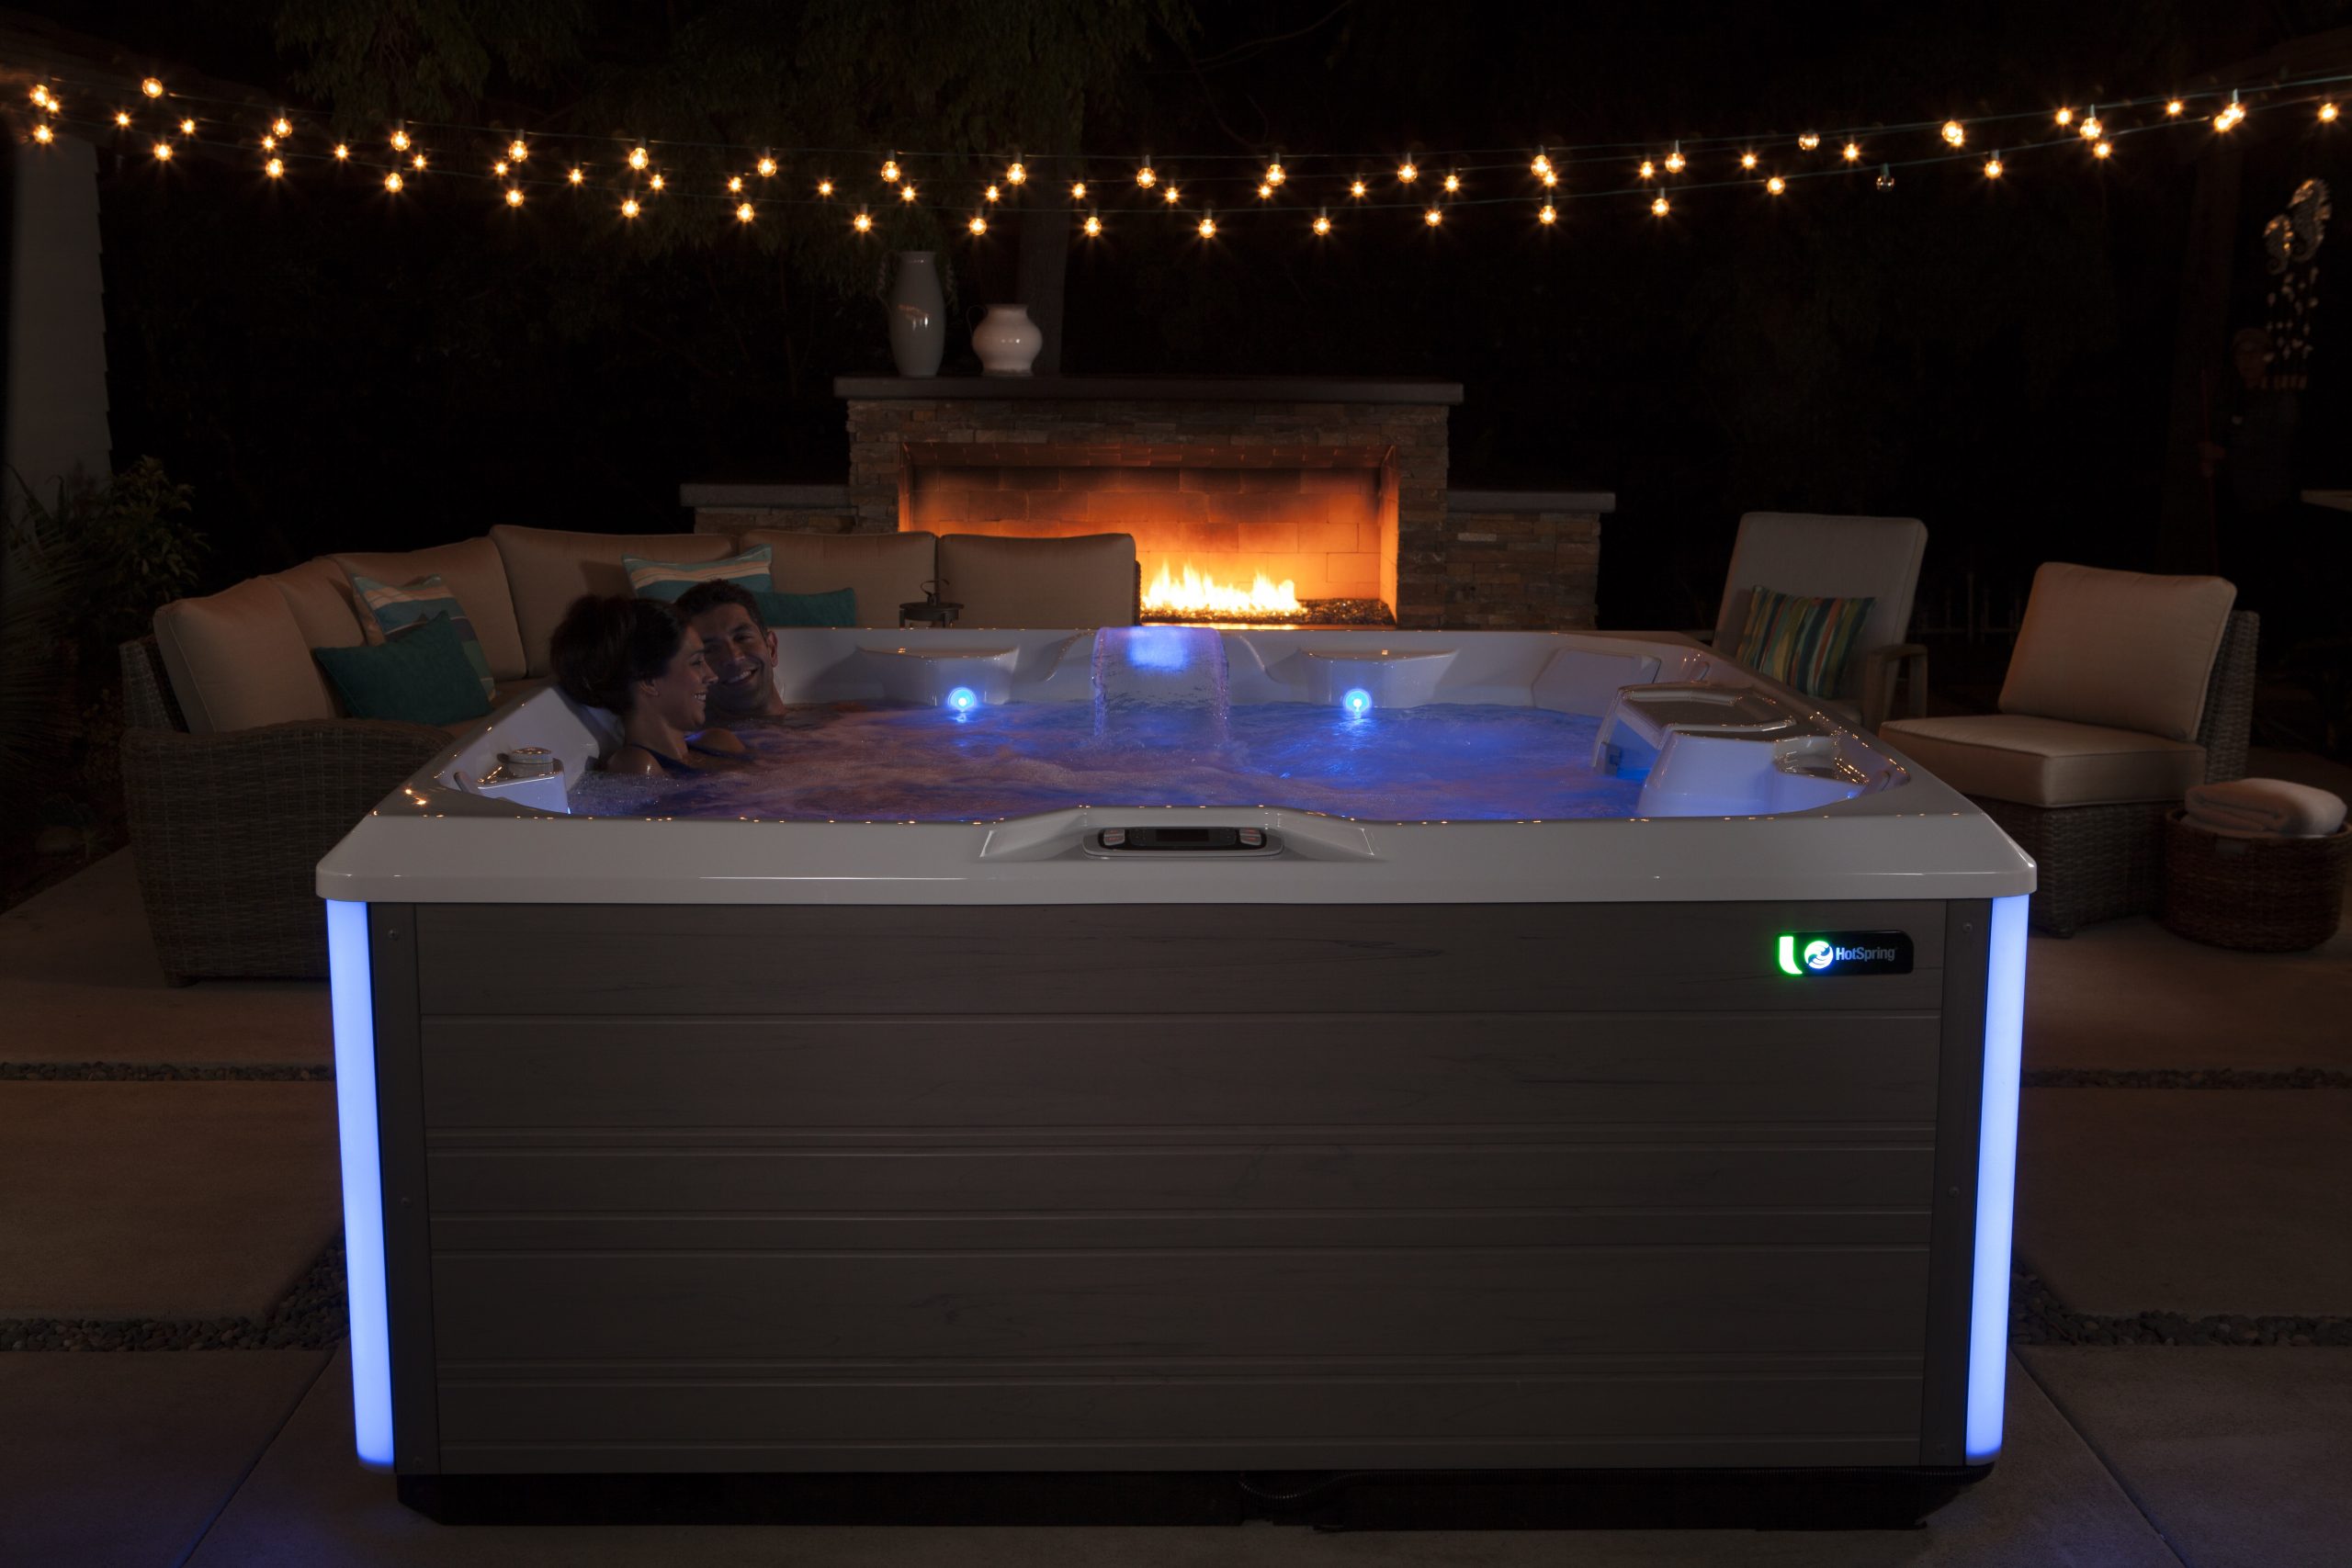 Planning The Perfect Hot Tub Date Night